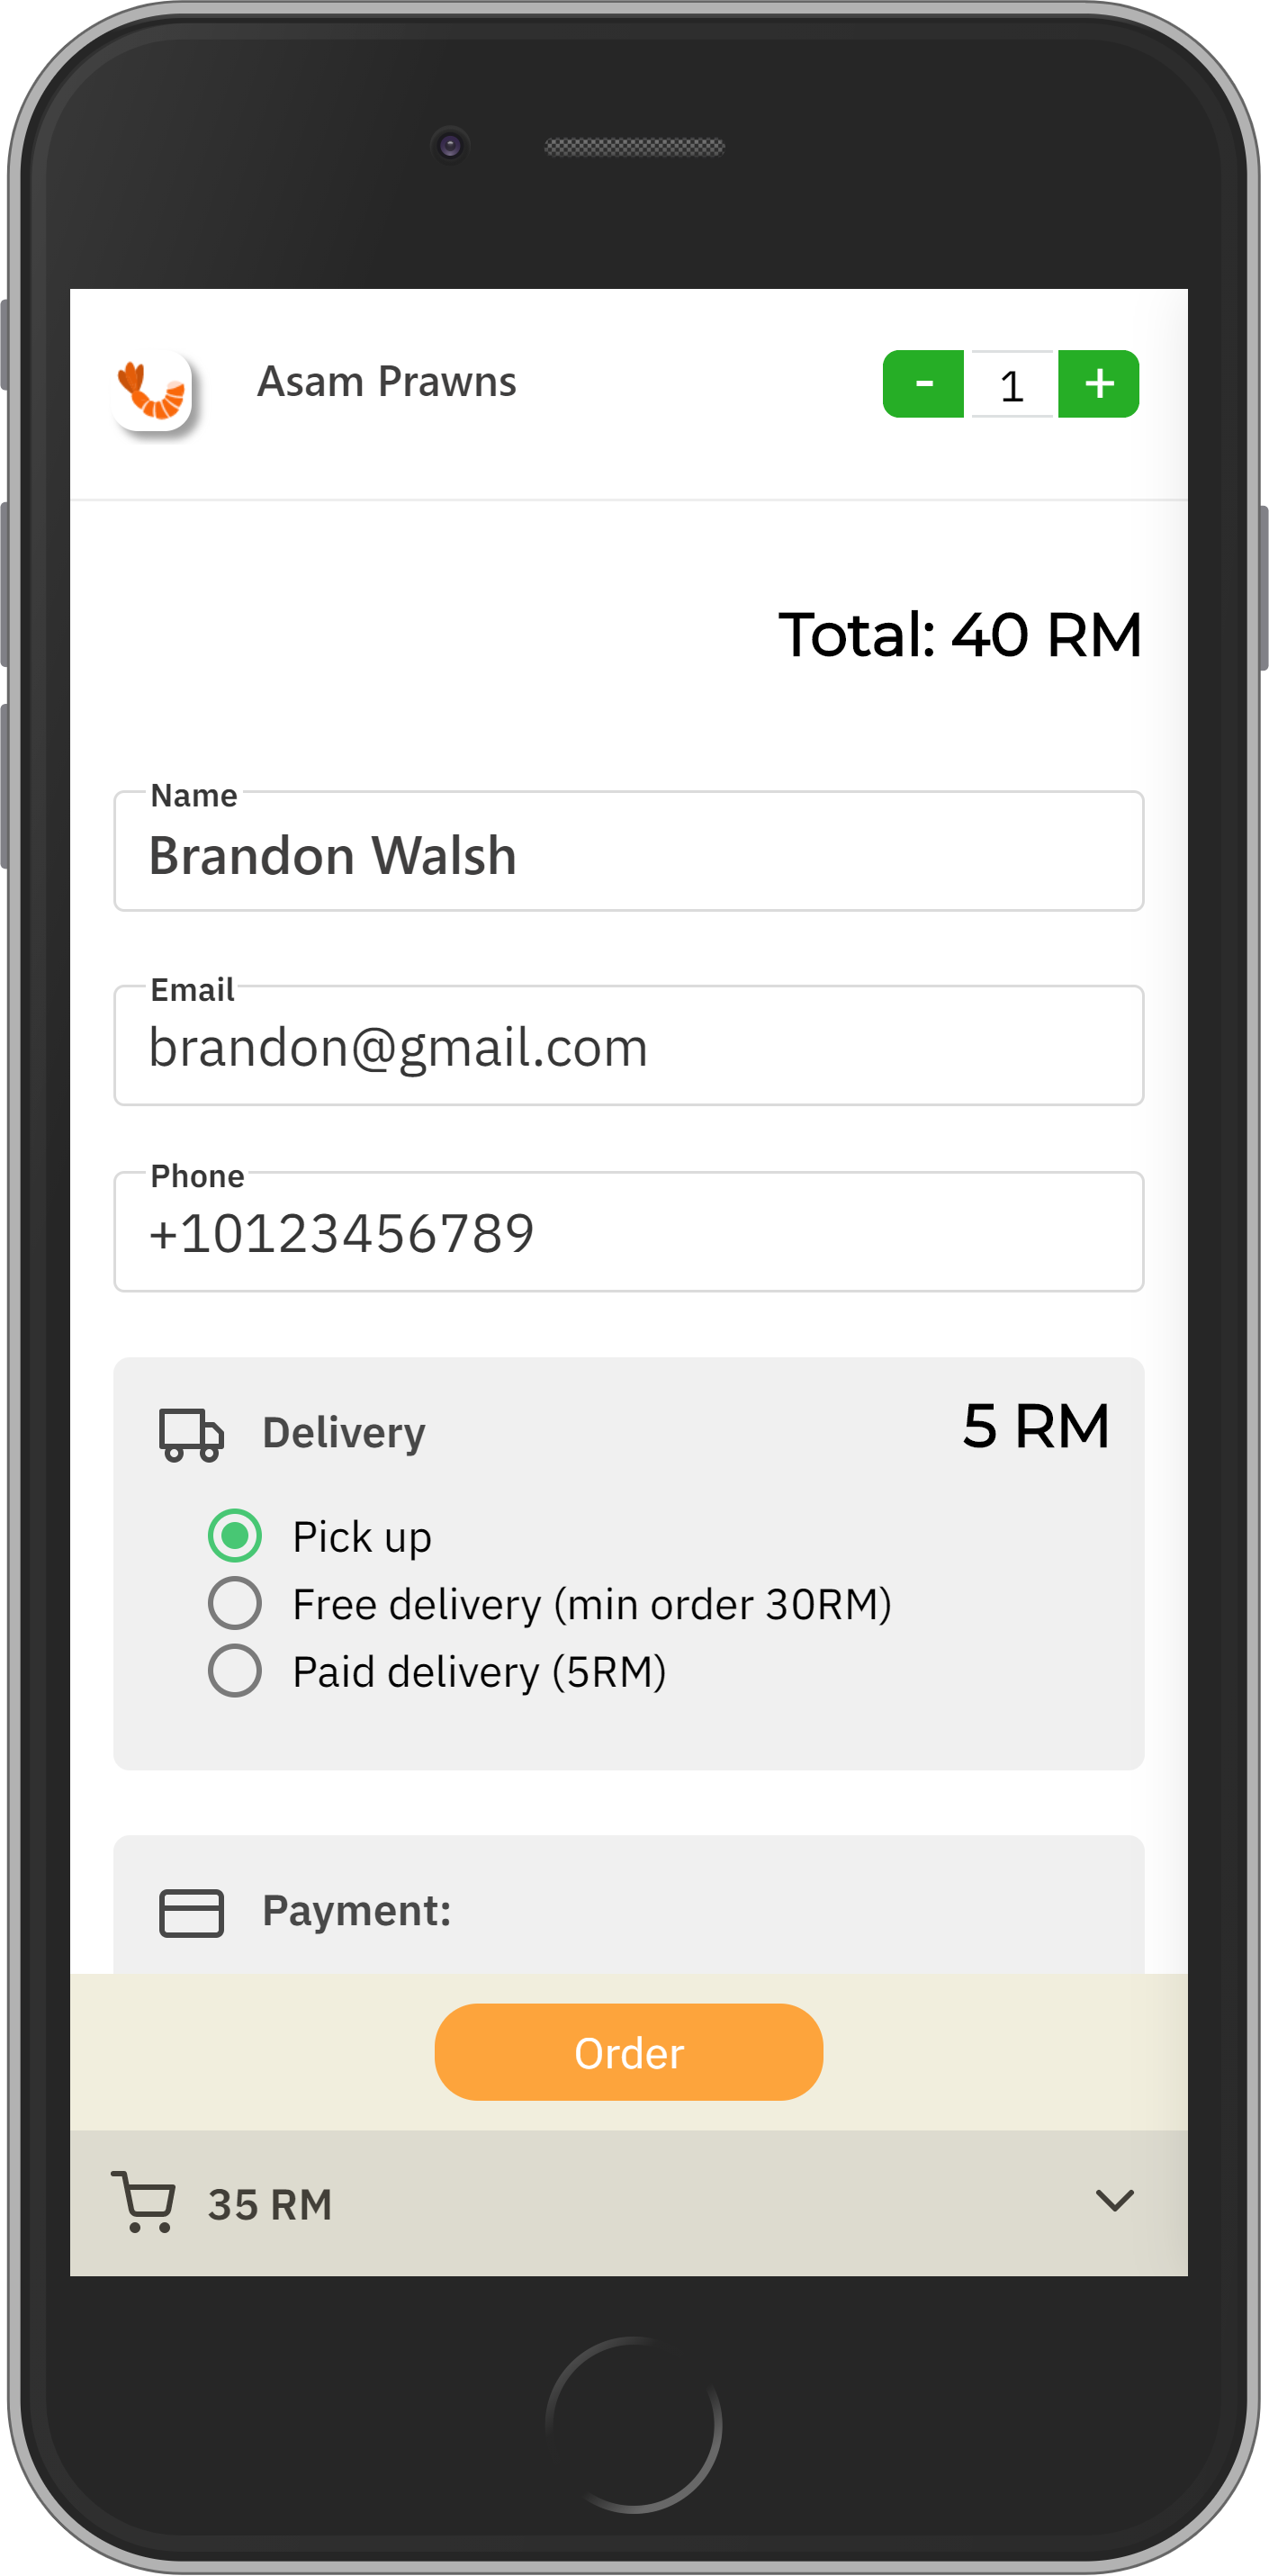 Your own web-app for ordering